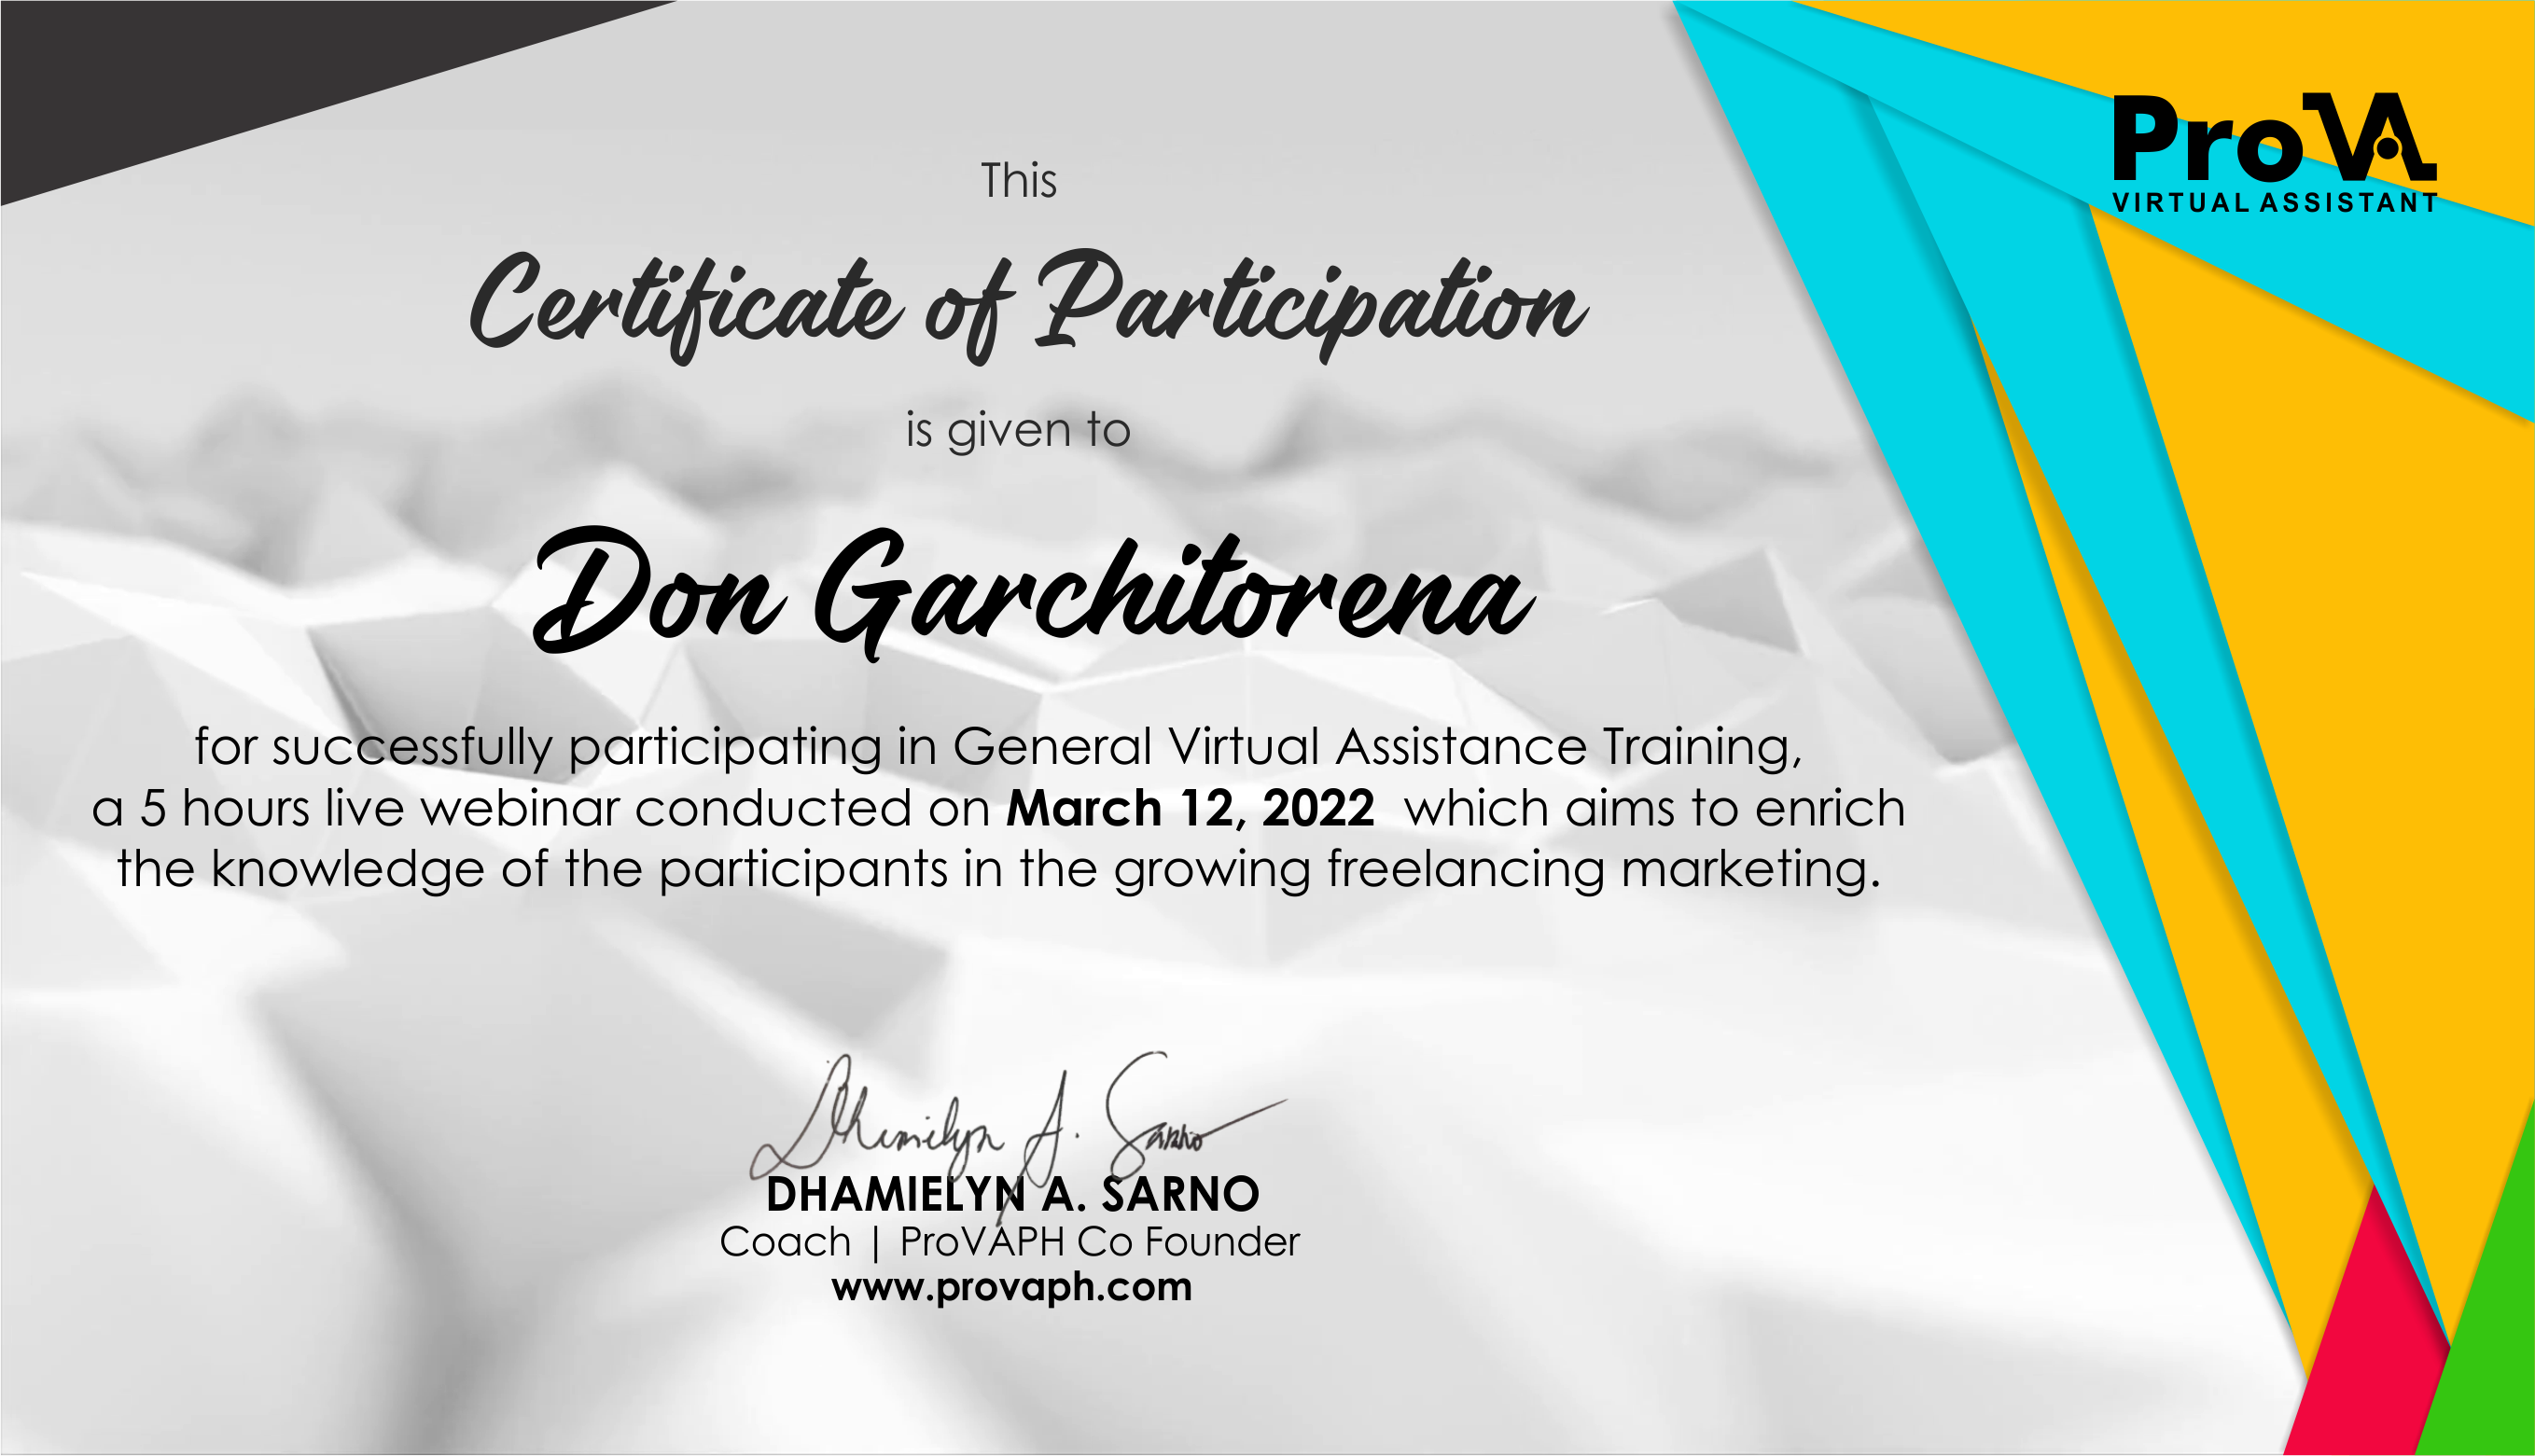 Don Garchitorena // Virtual Assistant, Ecommerce Project Manager